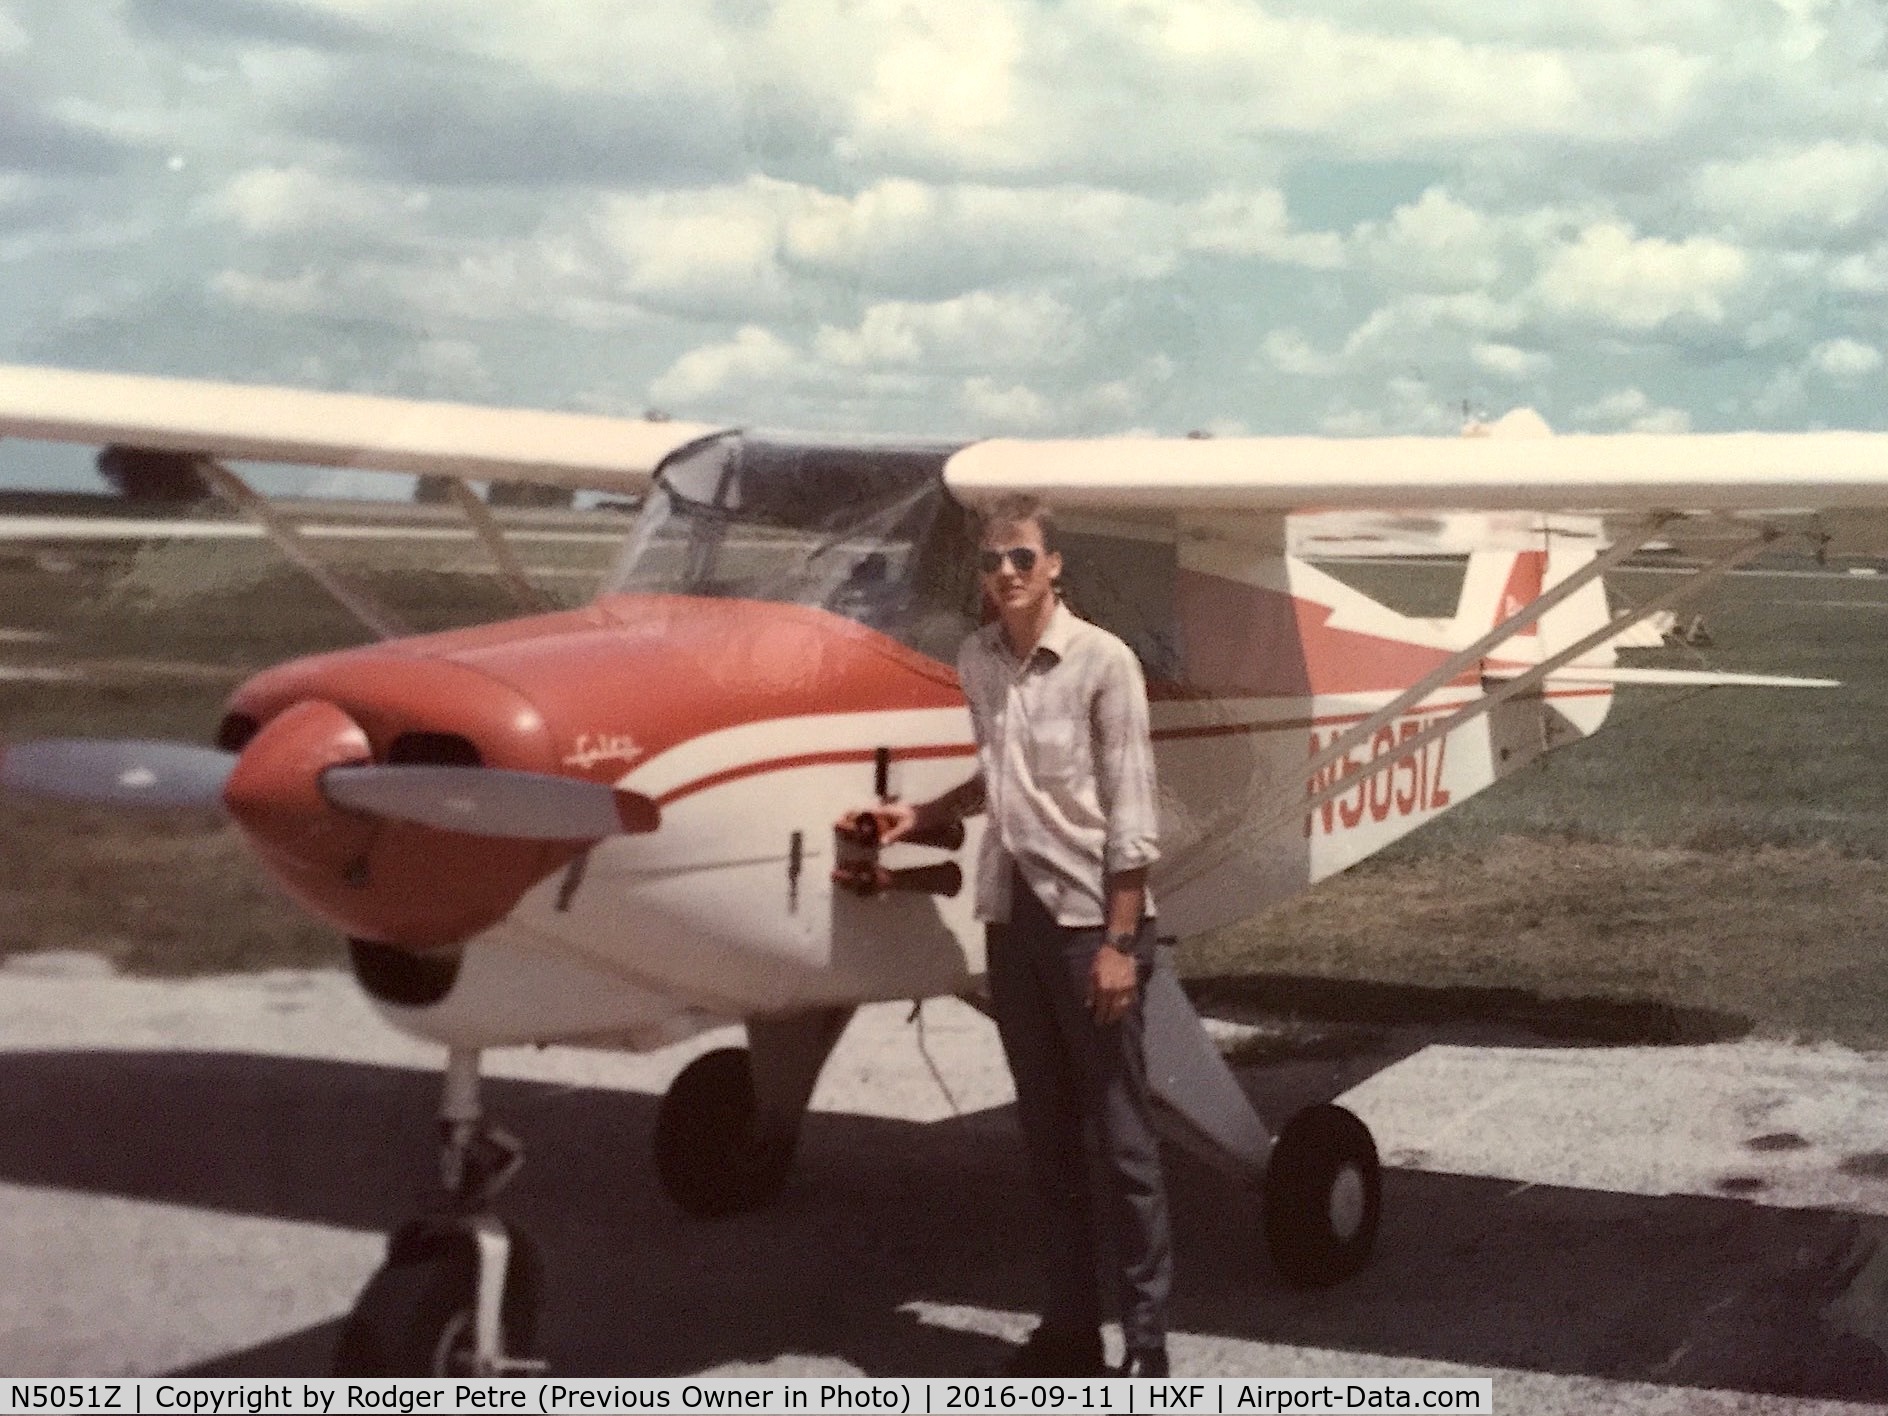 N5051Z, 1961 Piper PA-22-108 Colt C/N 22-8675, Photo taken about 1964 at Hartford Airport in Wisconsin.  Basic VFR airplane with an old 